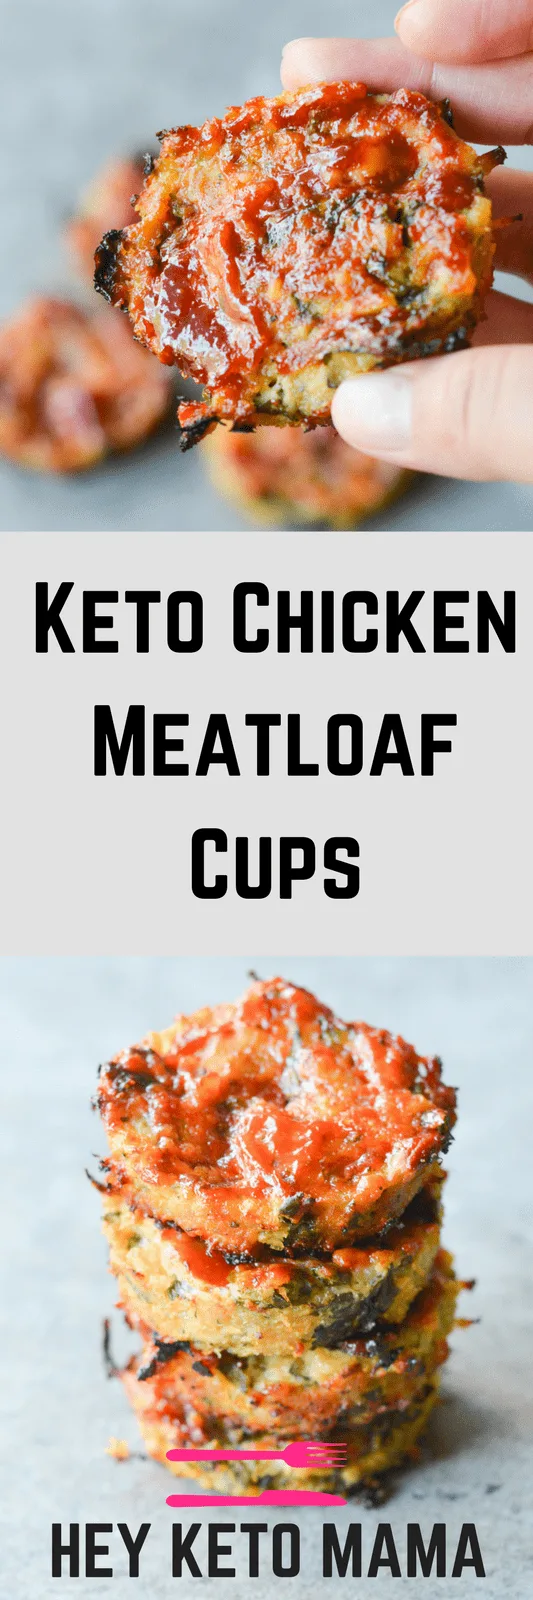 These Keto Chicken Meatloaf Cups are one of the easiest Low Carb Dinners I've ever made! Want to add some extra flavor? Wrap them in bacon! | heyketomama.com